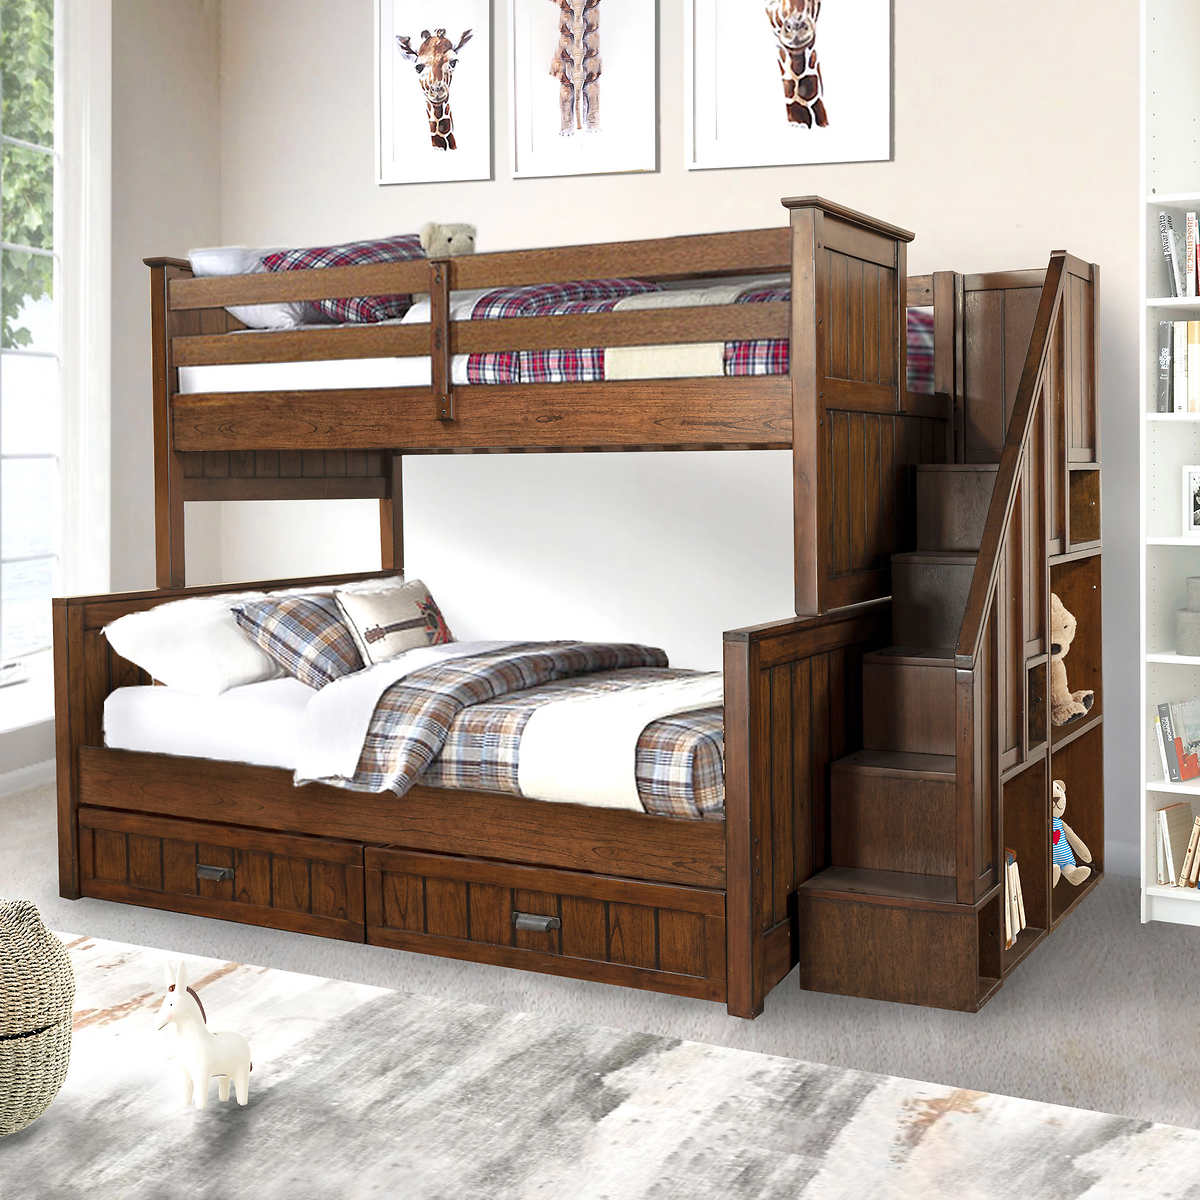 Maddox Twin Over Double Bunk Bed Costco, Double Top Bunk Beds